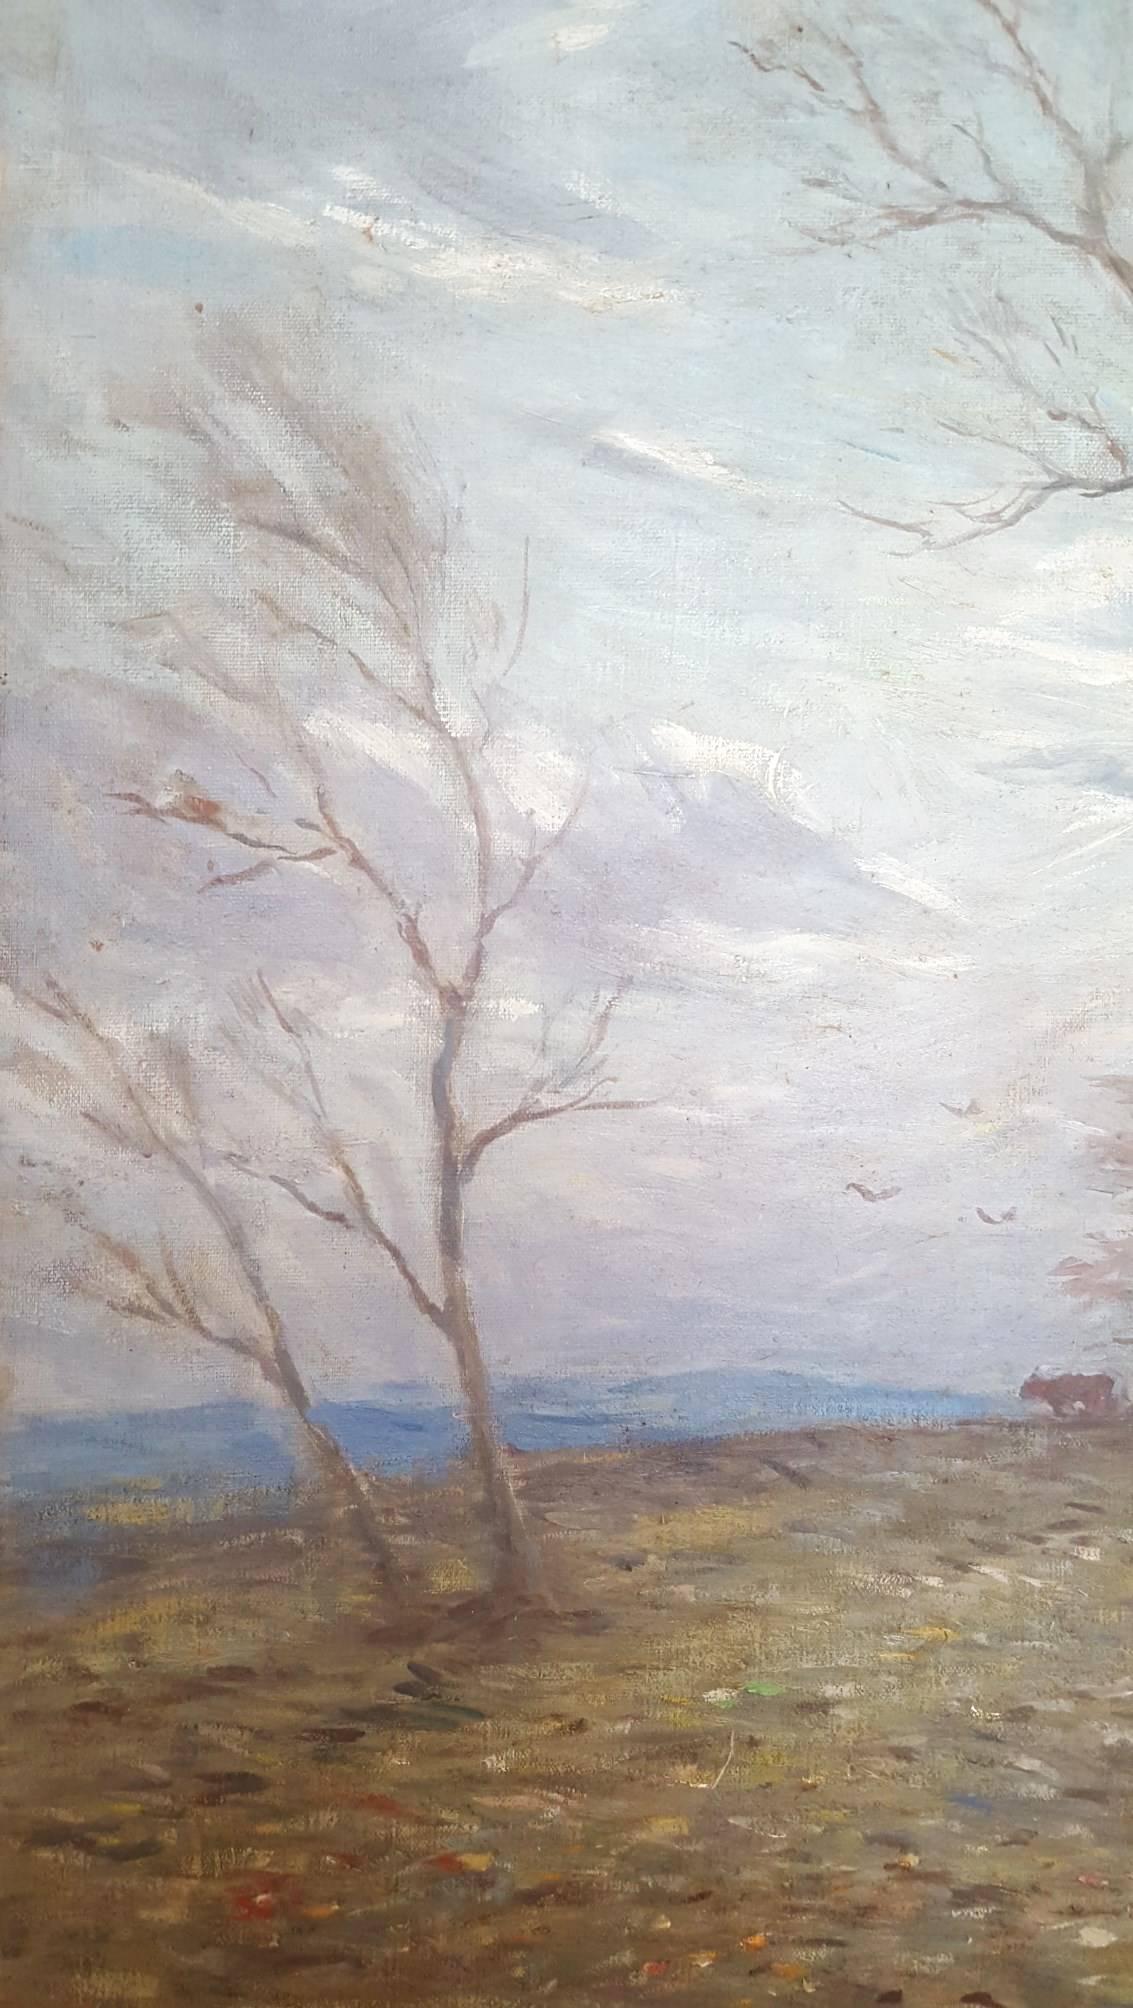 An original signed oil on canvas by American artist Eliot Candee Clark (1883-1980) titled 